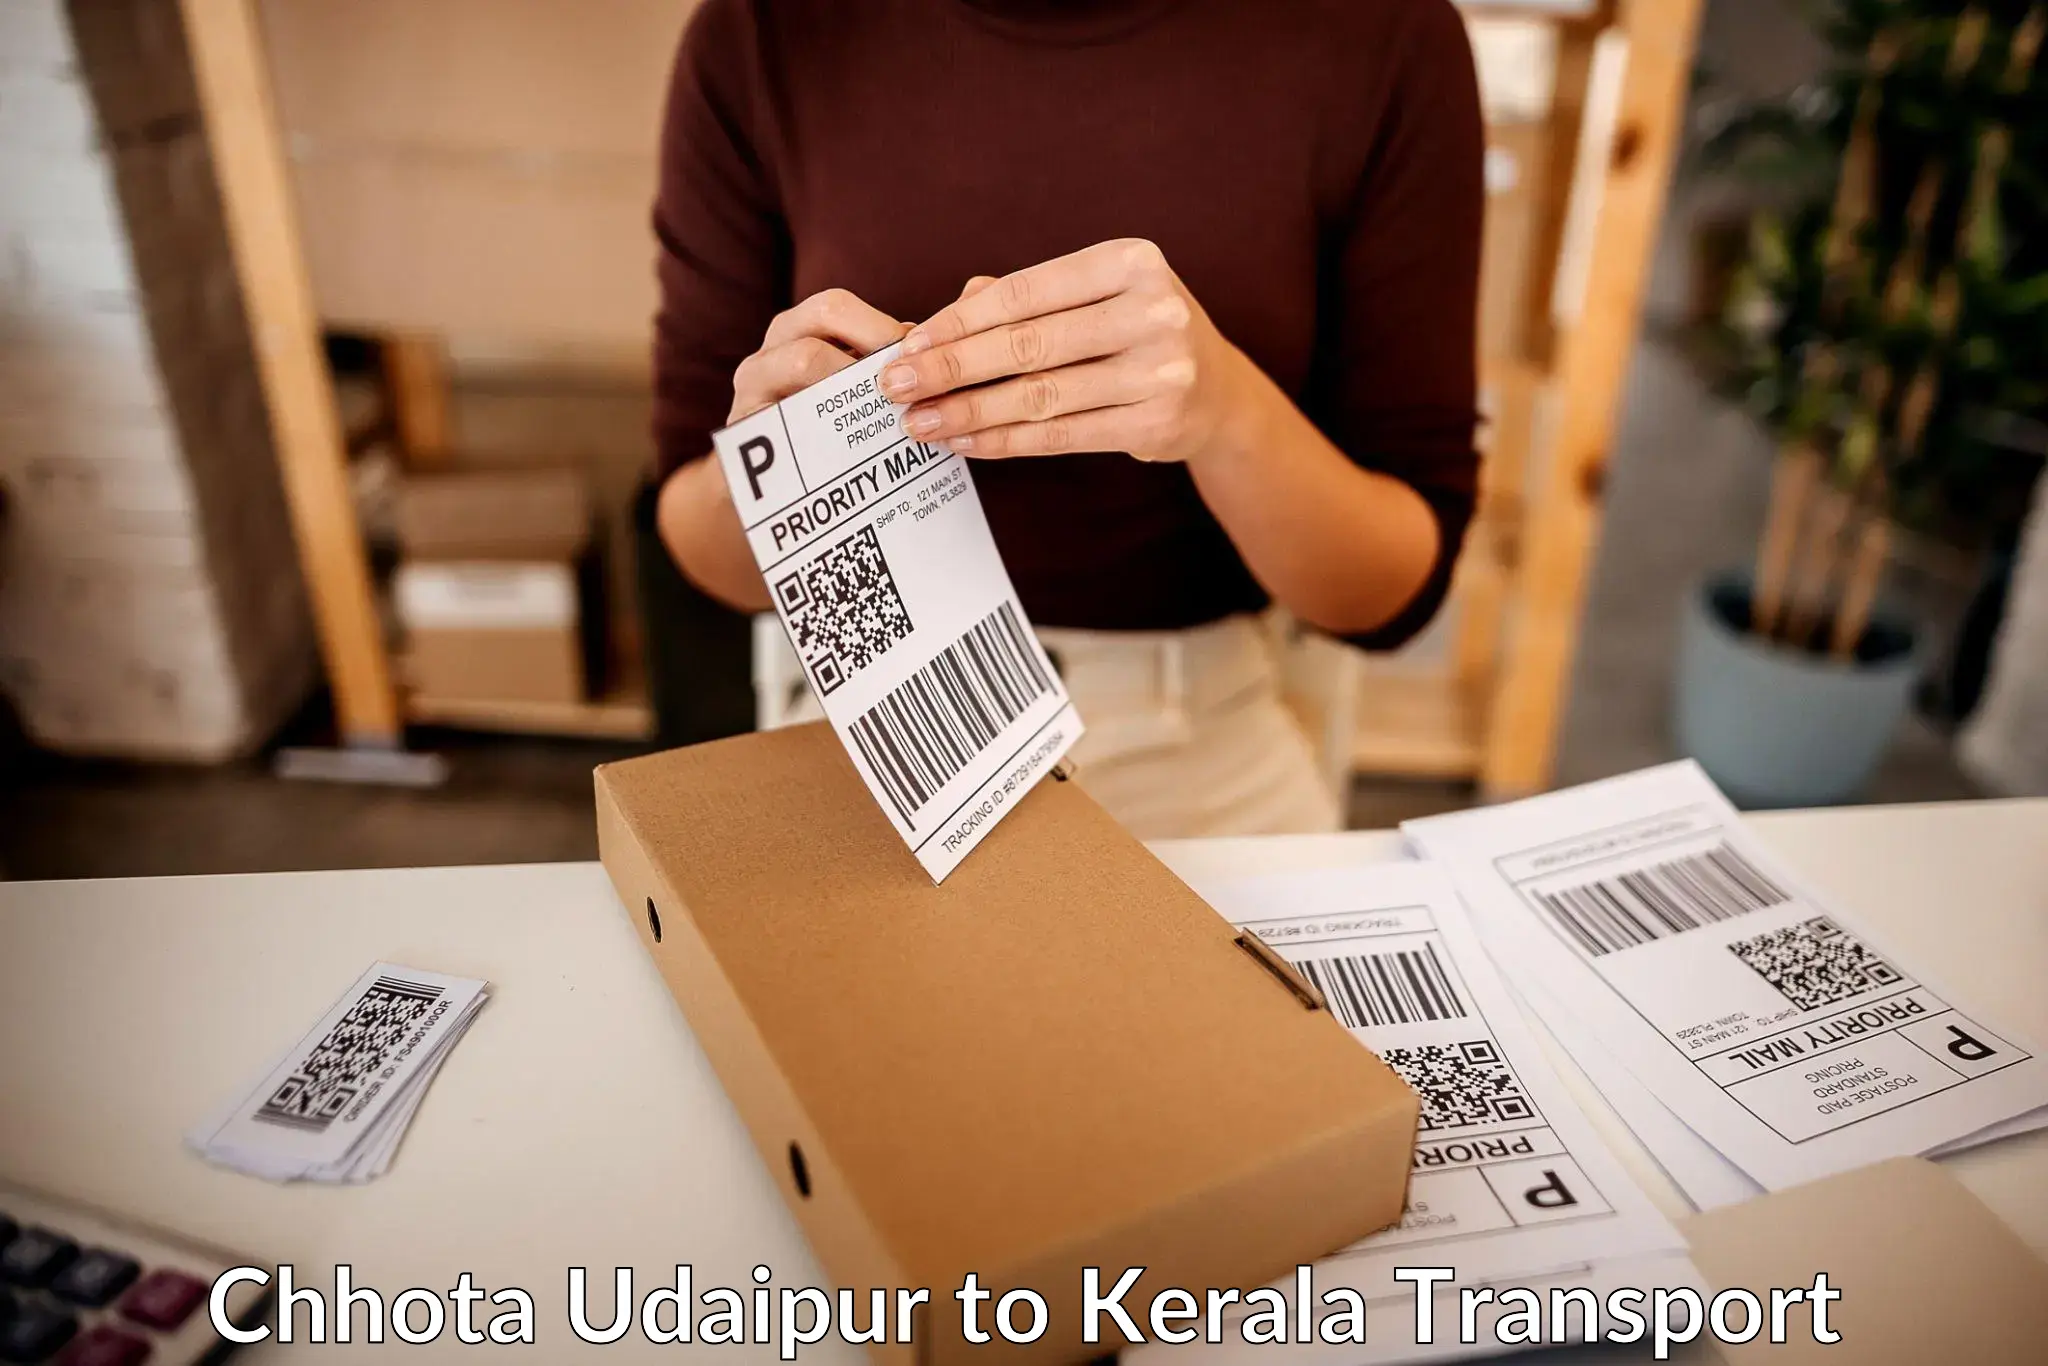 Daily parcel service transport Chhota Udaipur to Kerala